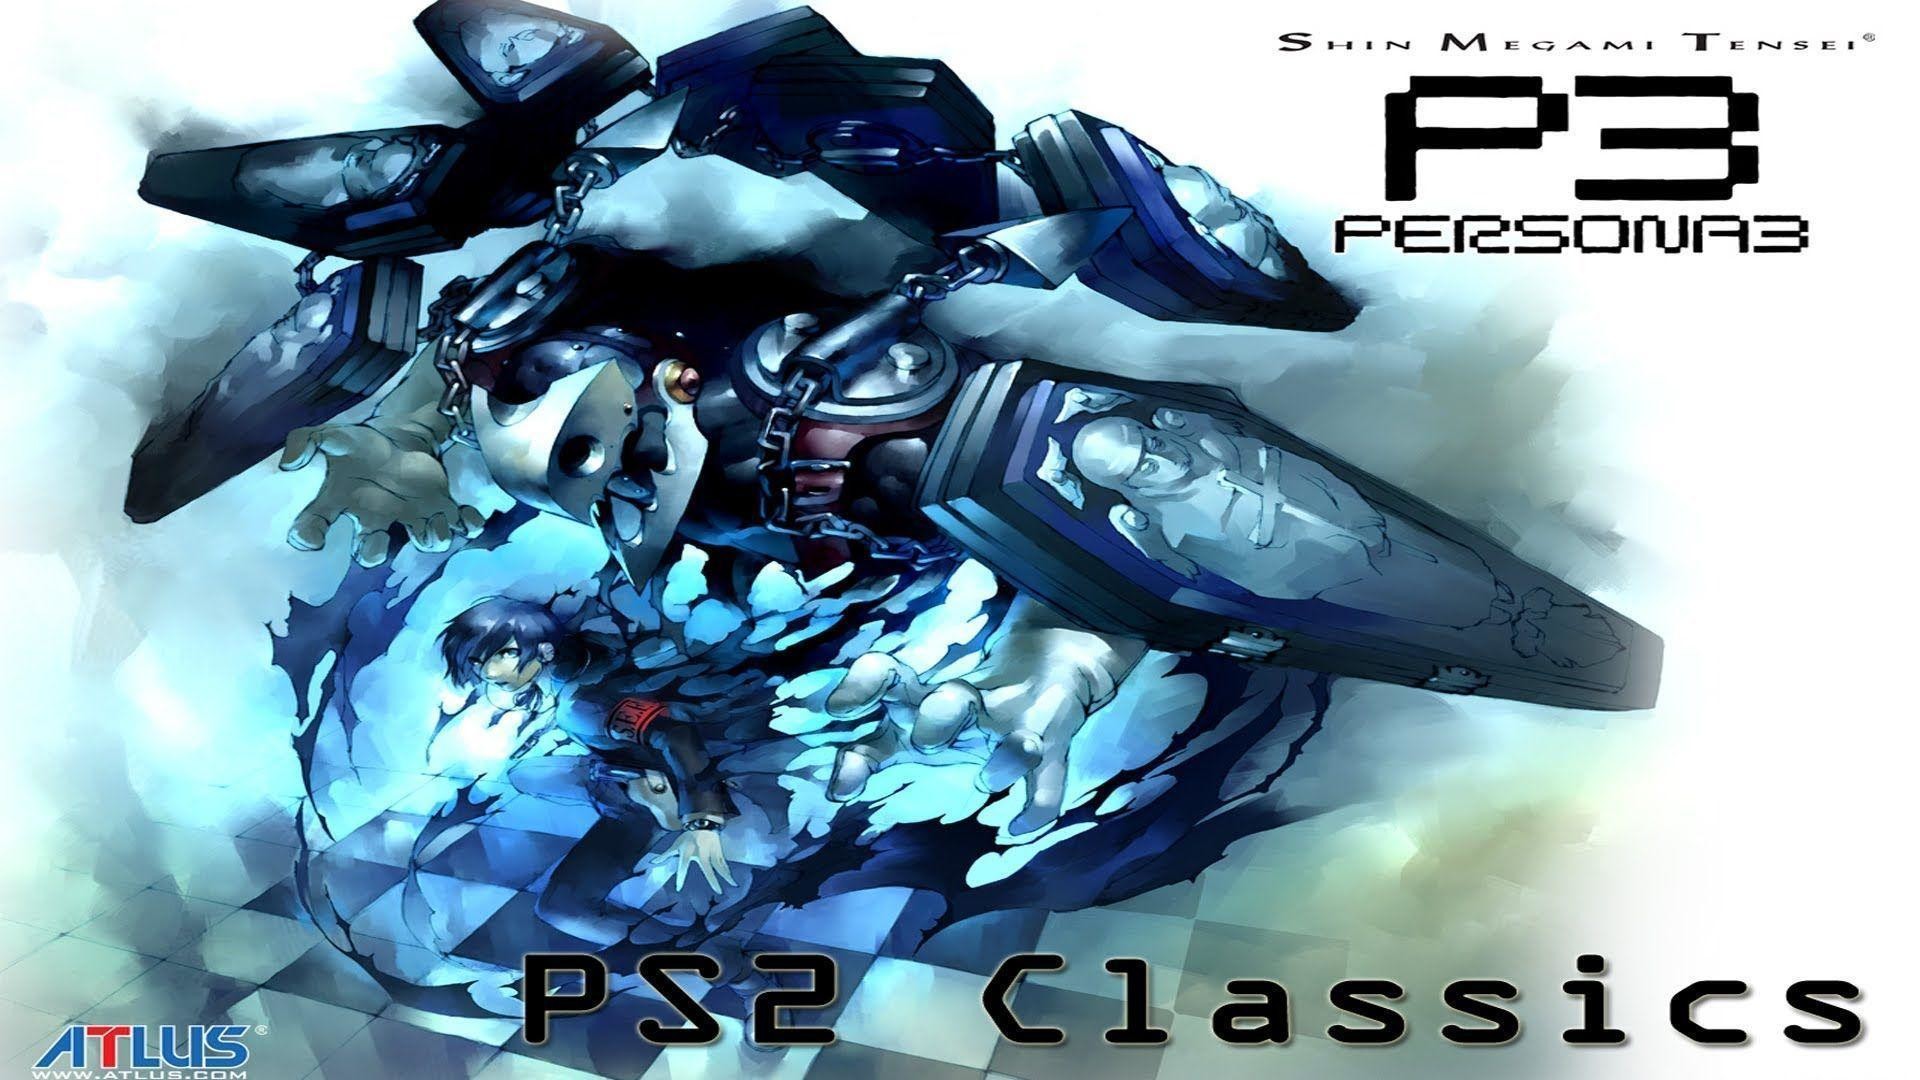 1920x1080 Wallpapers For > Persona 3 Thanatos Wallpaper